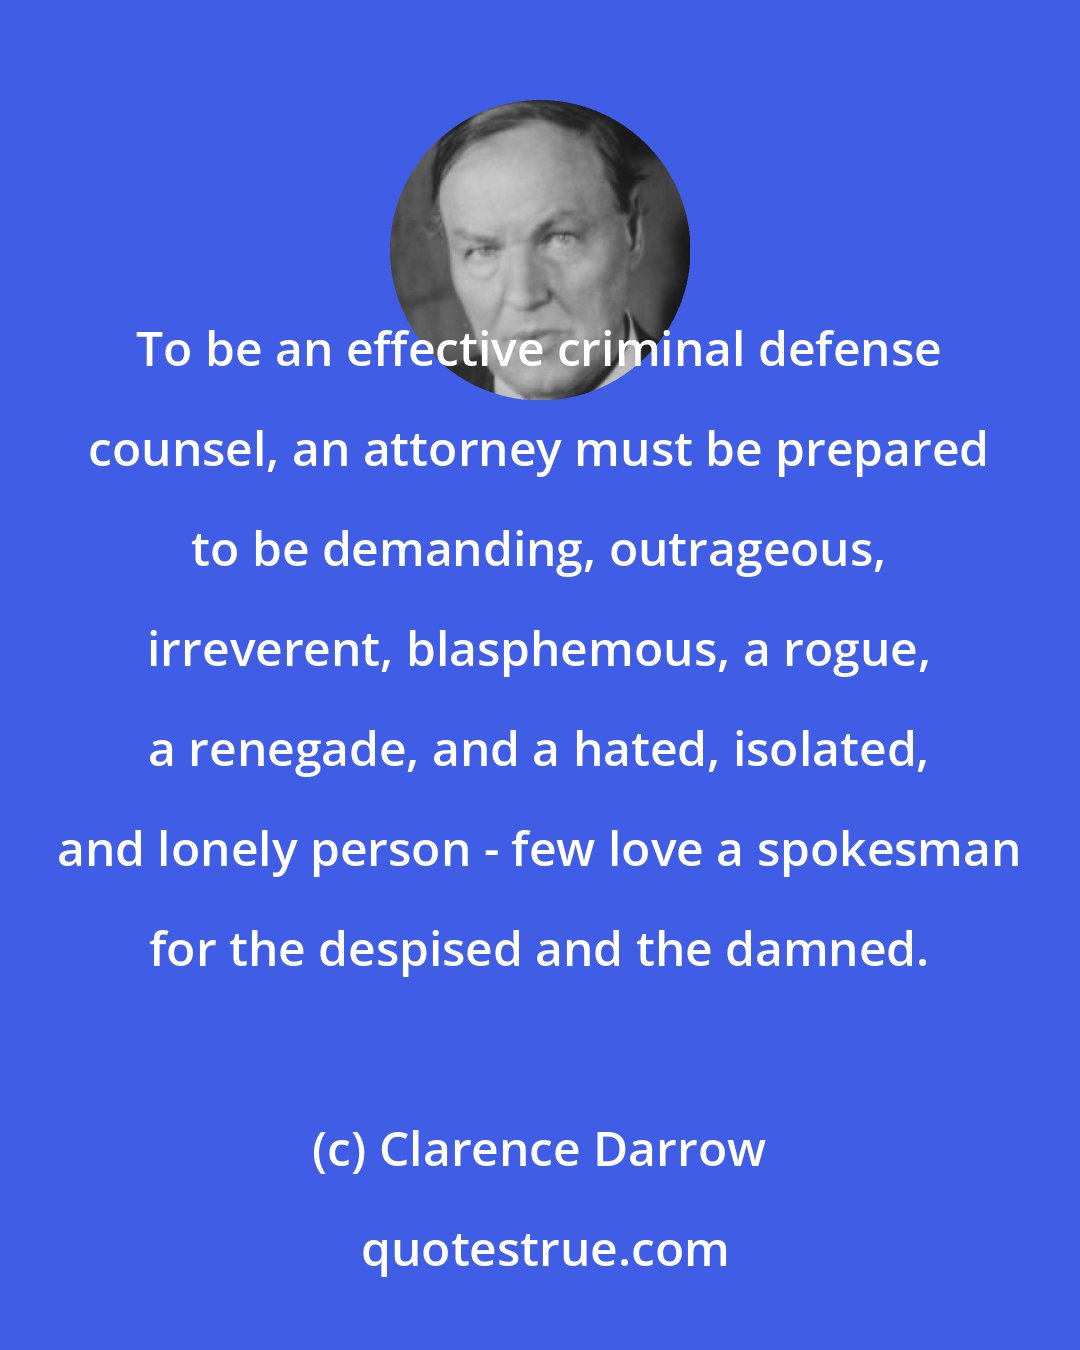 Clarence Darrow: To be an effective criminal defense counsel, an attorney must be prepared to be demanding, outrageous, irreverent, blasphemous, a rogue, a renegade, and a hated, isolated, and lonely person - few love a spokesman for the despised and the damned.